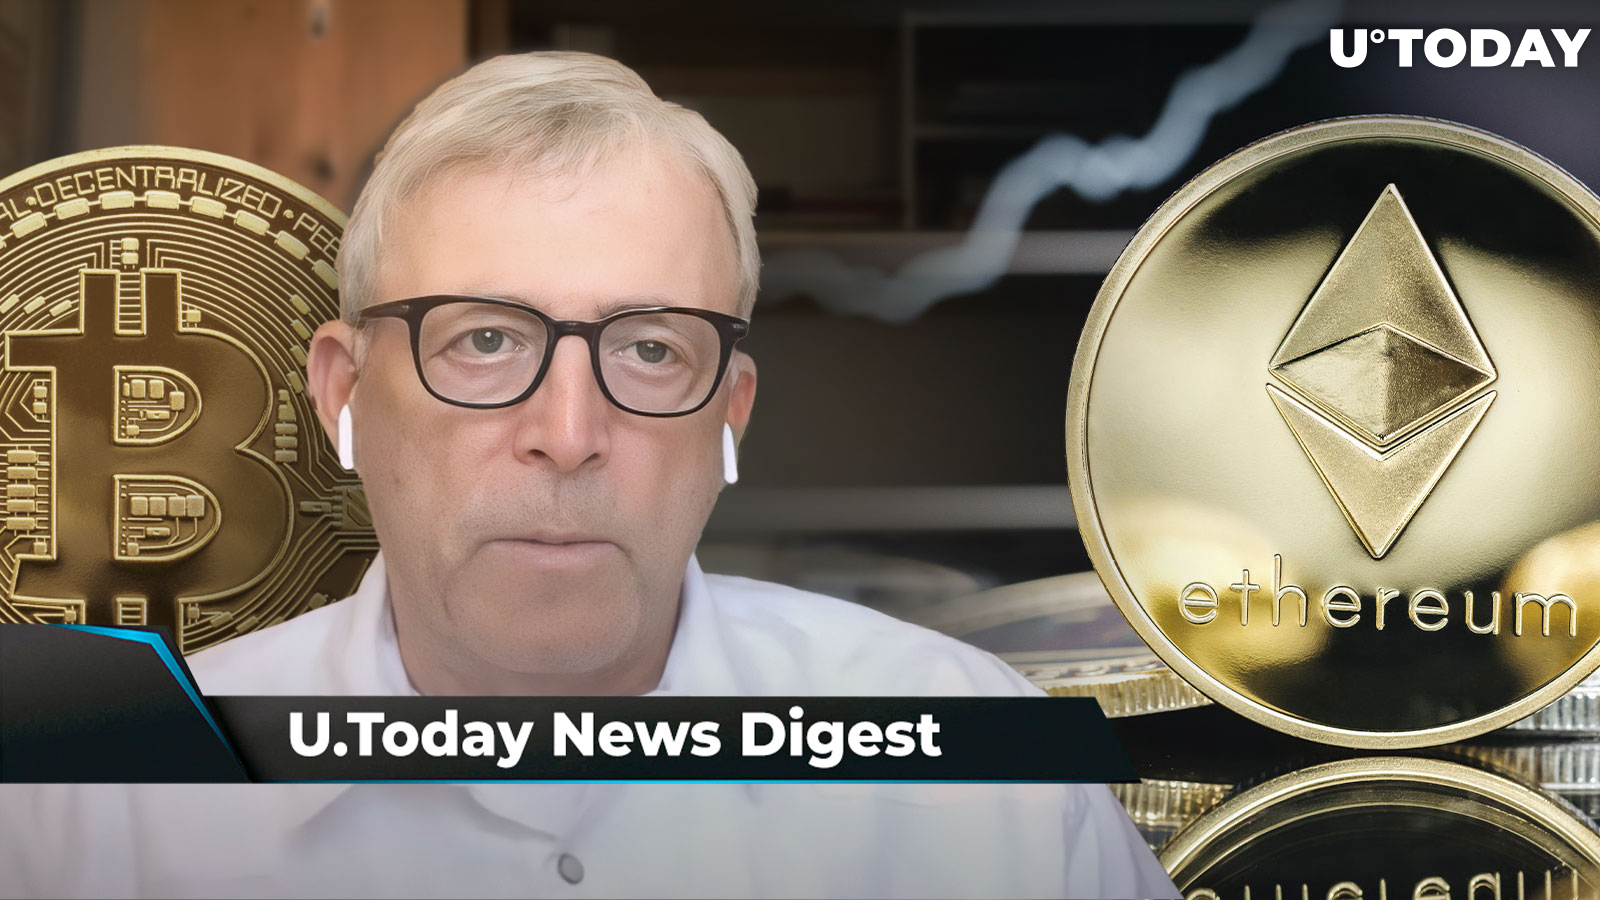 SHIB Becomes 2nd Trading Crypto on CoinMarketCap, Analyst Names Year When ETH Might Hit $10,000, Peter Brandt Predicts Imminent Breakout for BTC: Crypto News Digest by U.Today